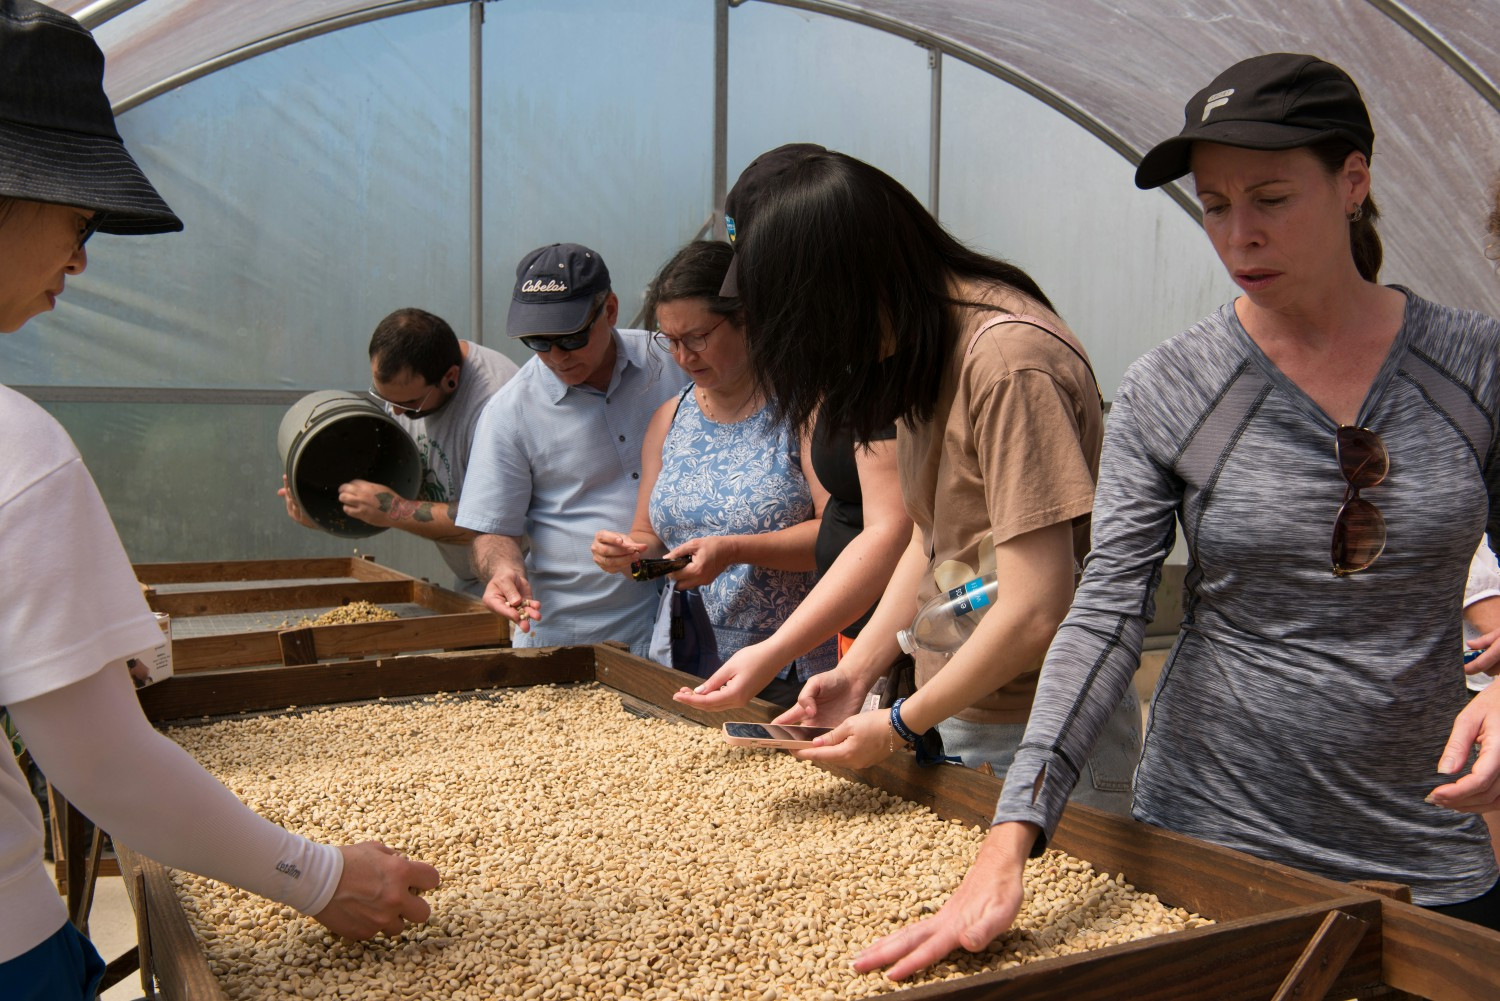 During our annual company trip, Finitians enjoy a tour of a working coffee farm in Puerto Rico.